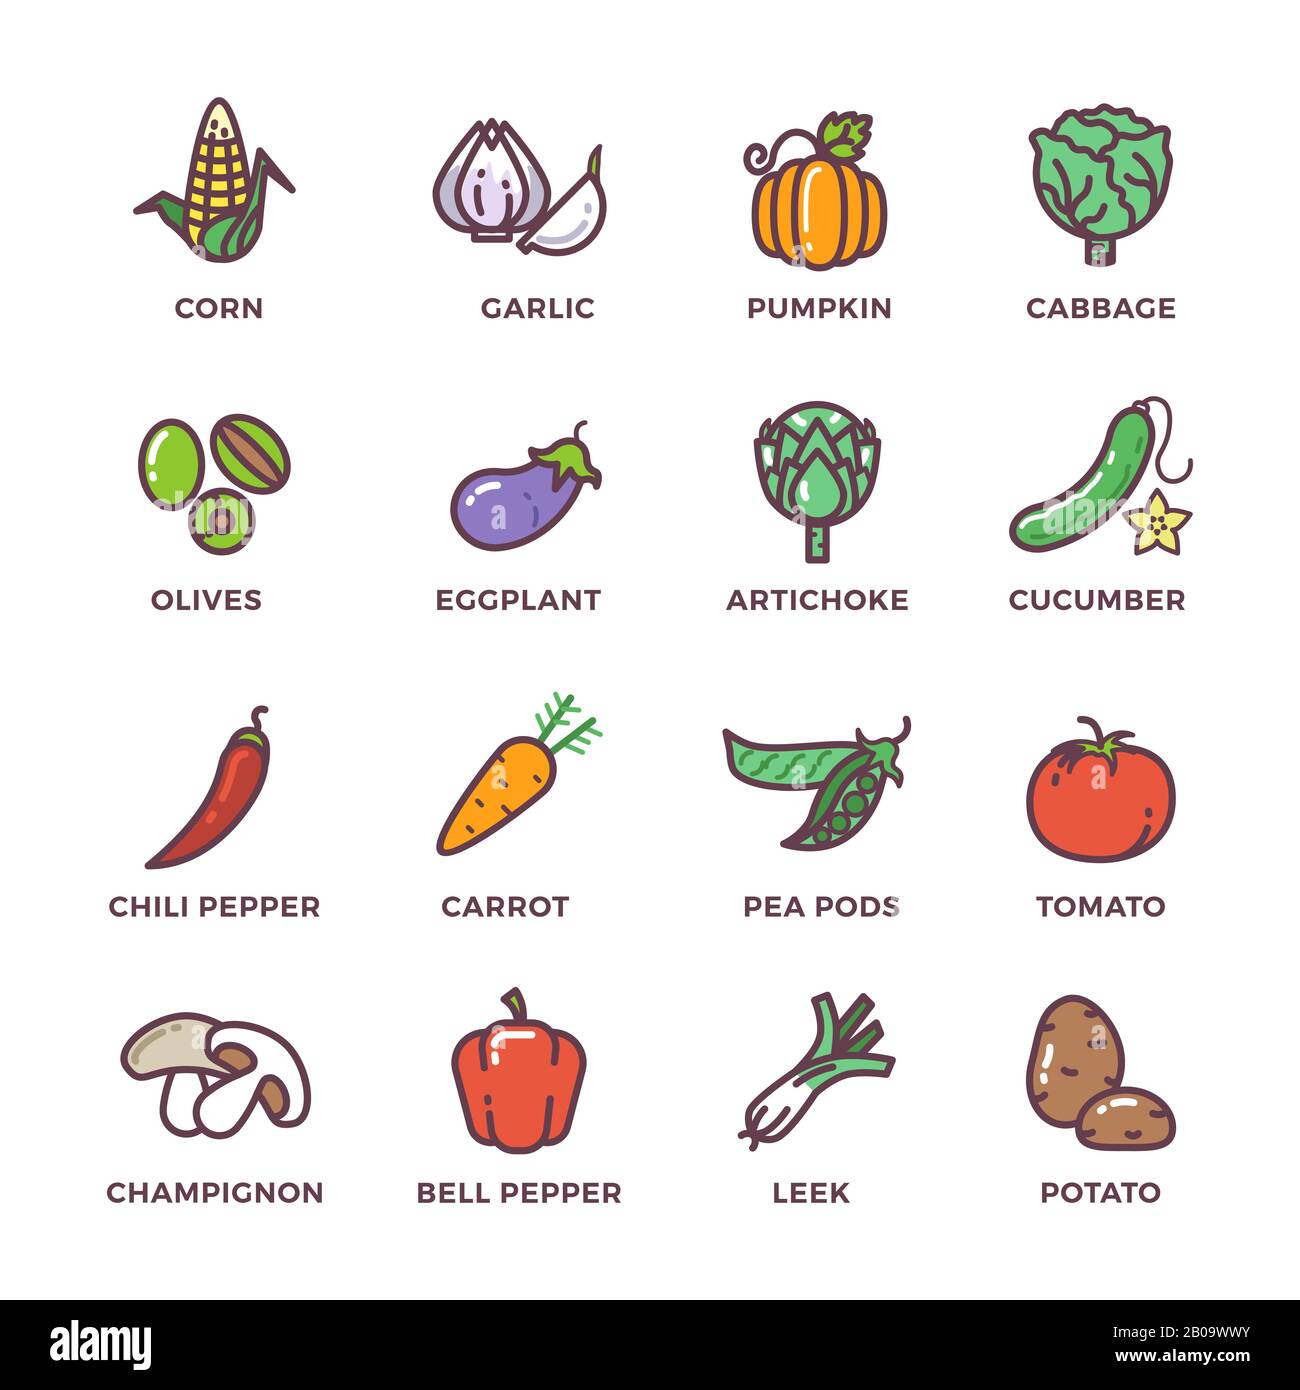 Vegetables vegan raw food colored vector icons set. Vegetable fot cooking illustration Stock Vector